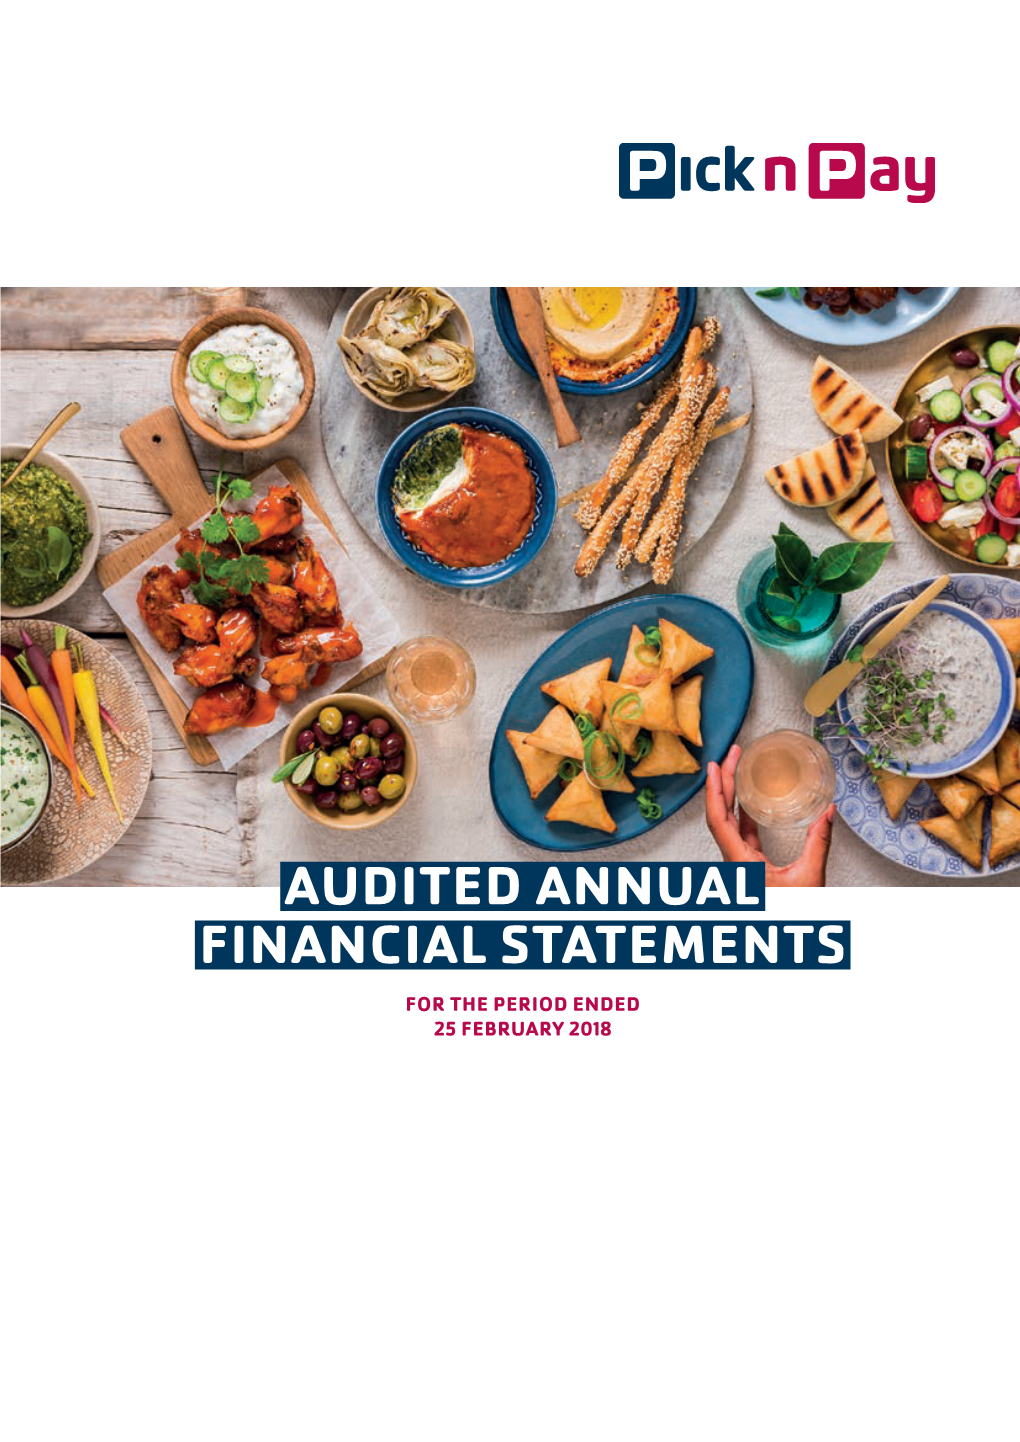 Audited Annual Financial Statements for the Period Ended 25 February 2018 Contents